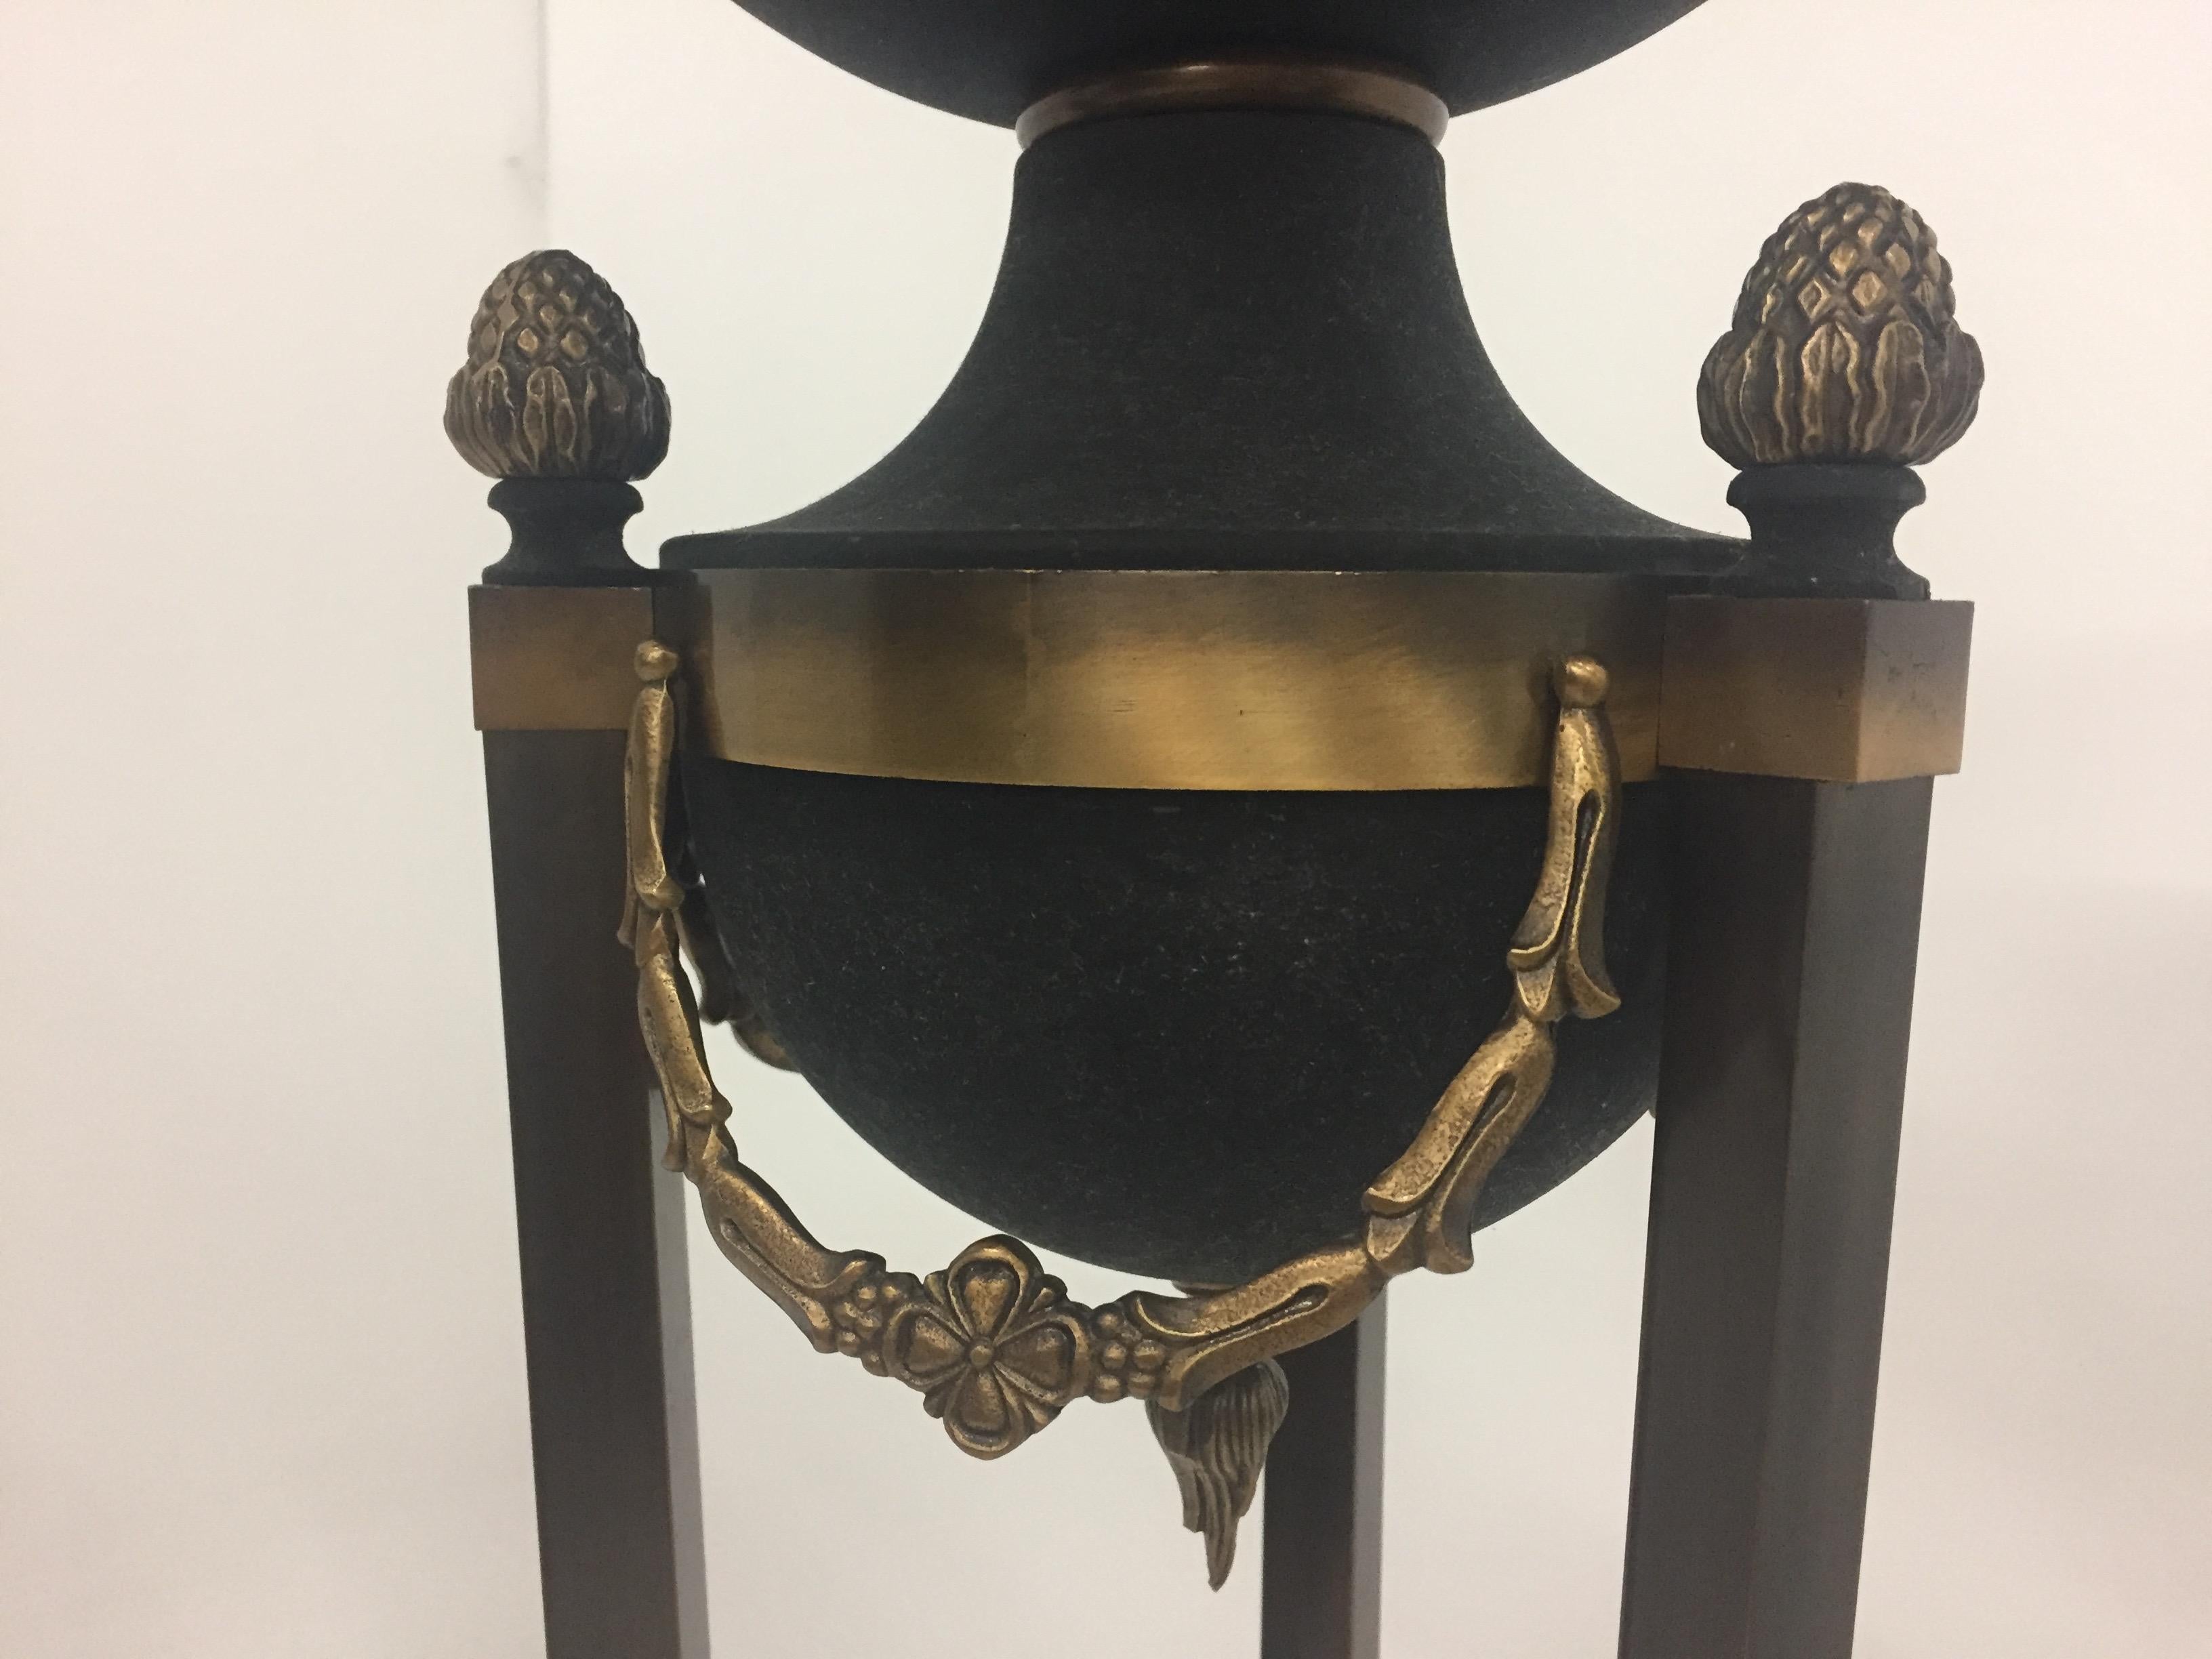 Beautiful elegant pair of patinated metal and brass Italian Hollywood Regency style torchieres having lovely neoclassical acorn finials and garland decoration and 3 paw feet at the bottom of each lamp.
Takes a candlebara shaped bulb and has